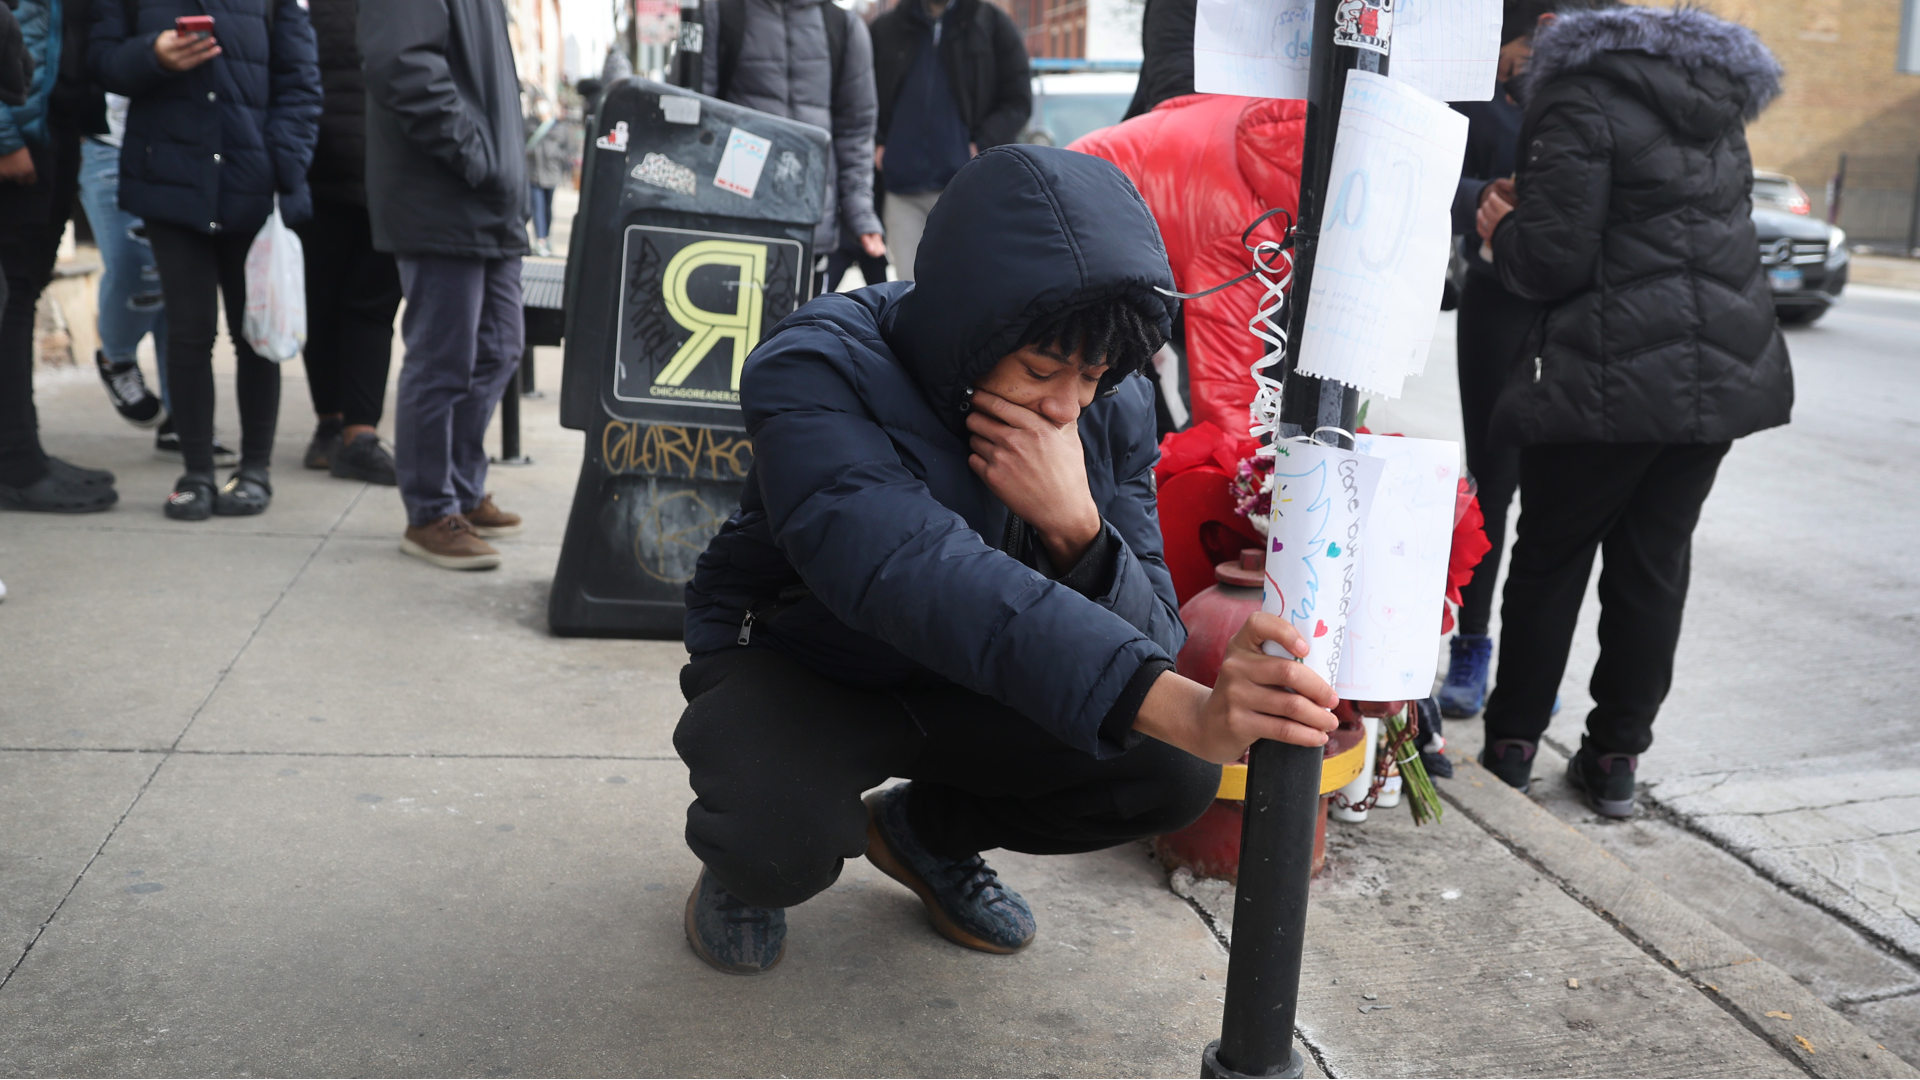 In Chicago, friends and classmates visit a memorial for 15-year-old Caleb Westbrooks, who was shot and killed nearby on January 18, 2022. He was one of 5 children shot in the city that afternoon.